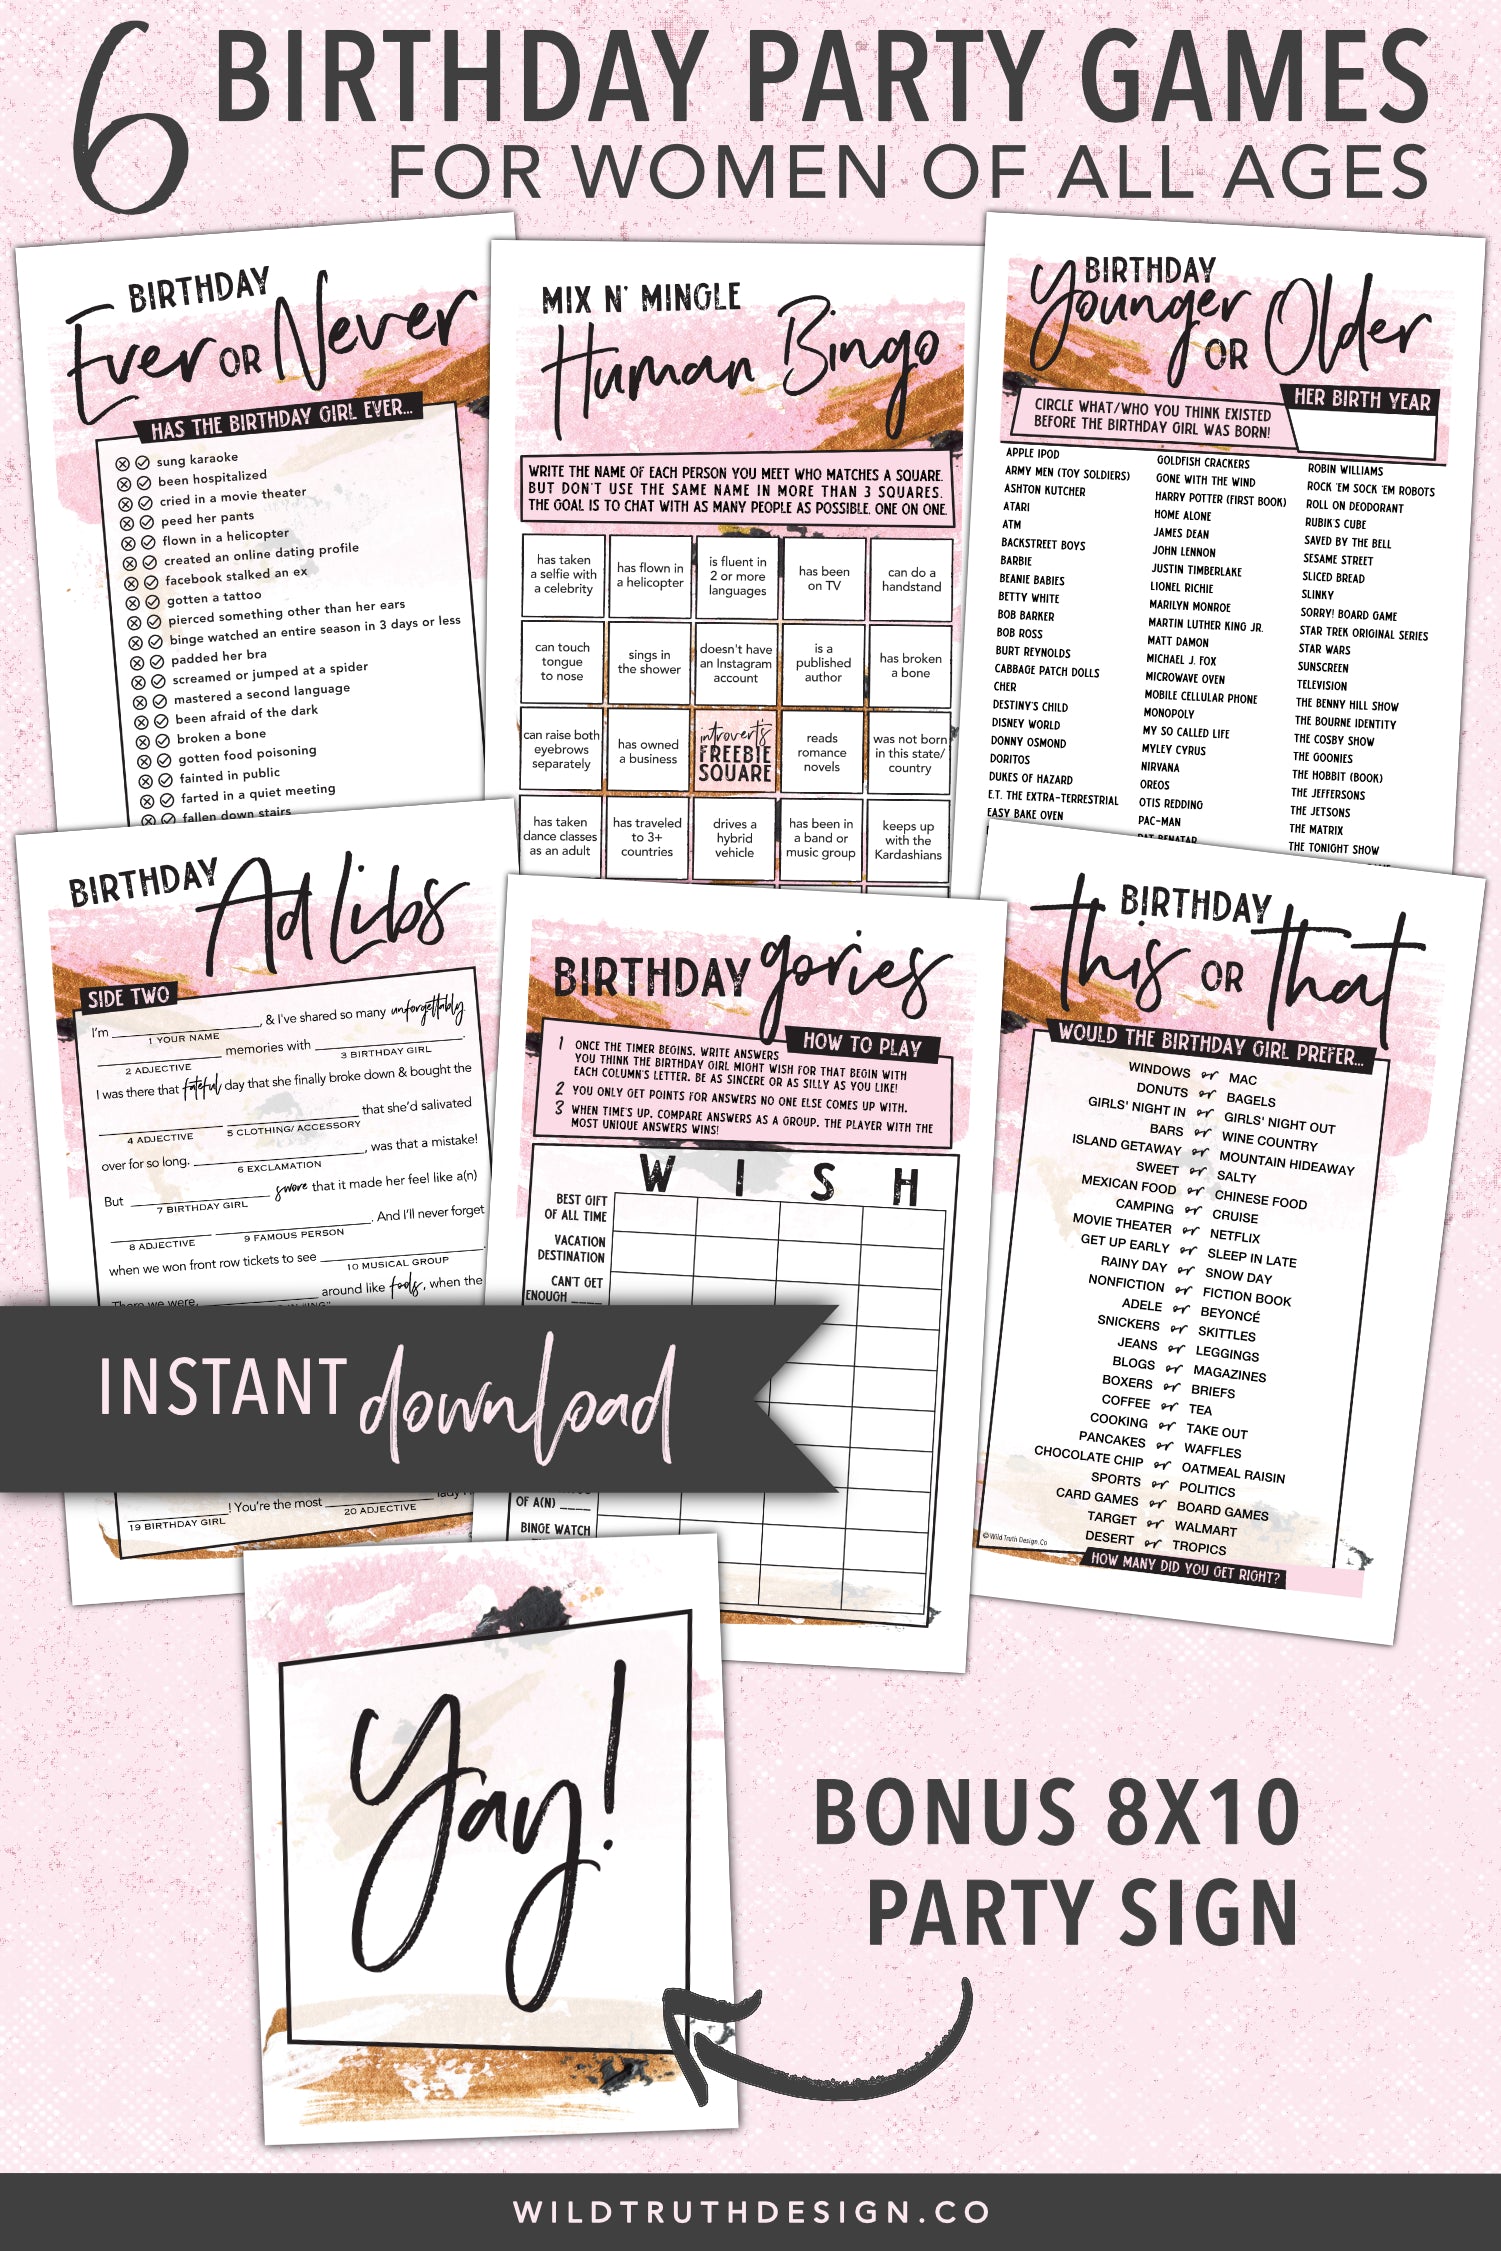 Birthday Party Games For Women Indoor - Printable